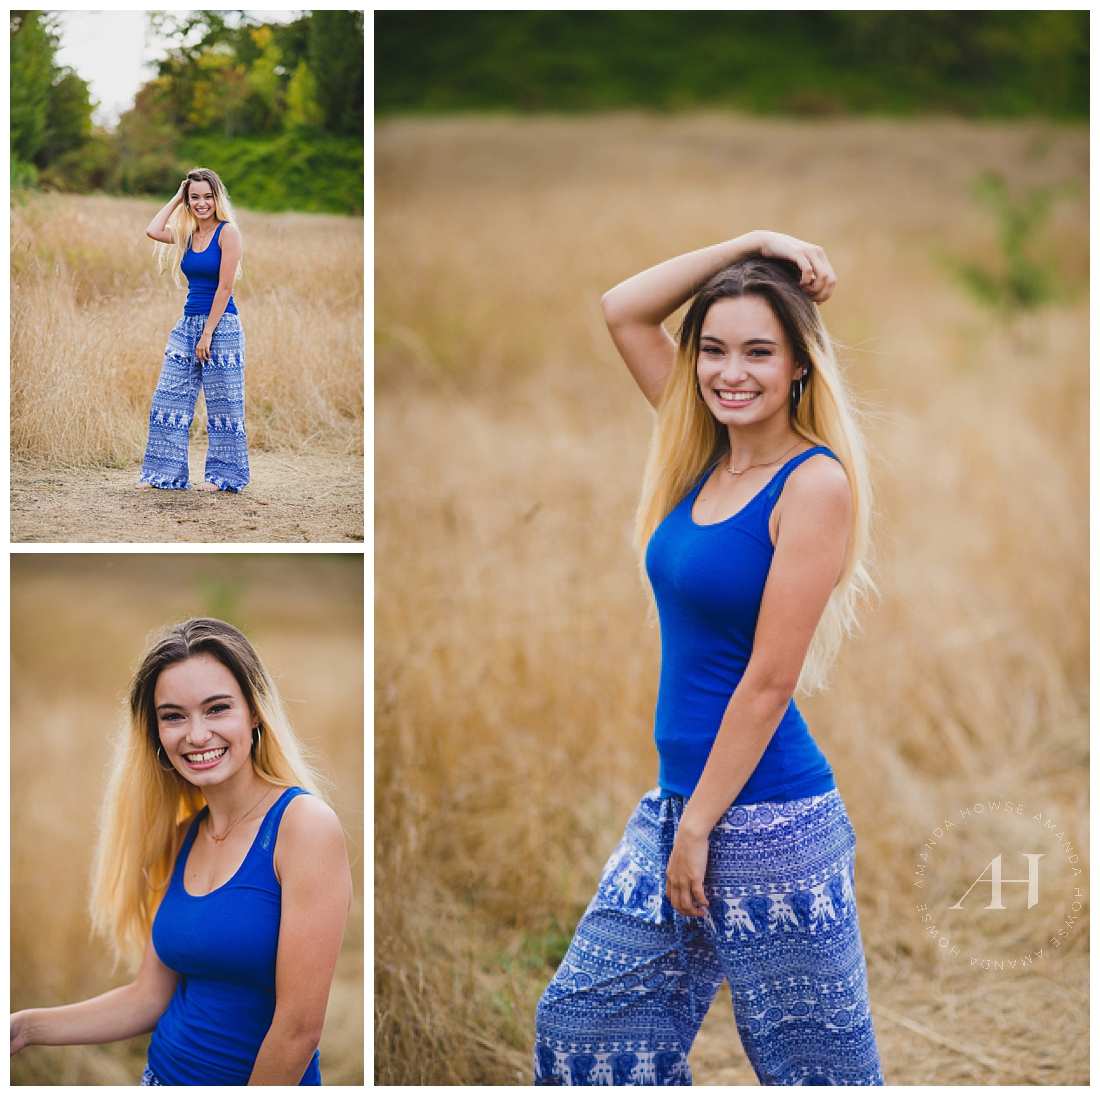 Boho Senior Portraits | Senior Girl in Tank Top and Elephant Pants | Outfit Inspo and Pose Ideas for Senior Girls | Photographed by the Best Tacoma Senior Photographer Amanda Howse